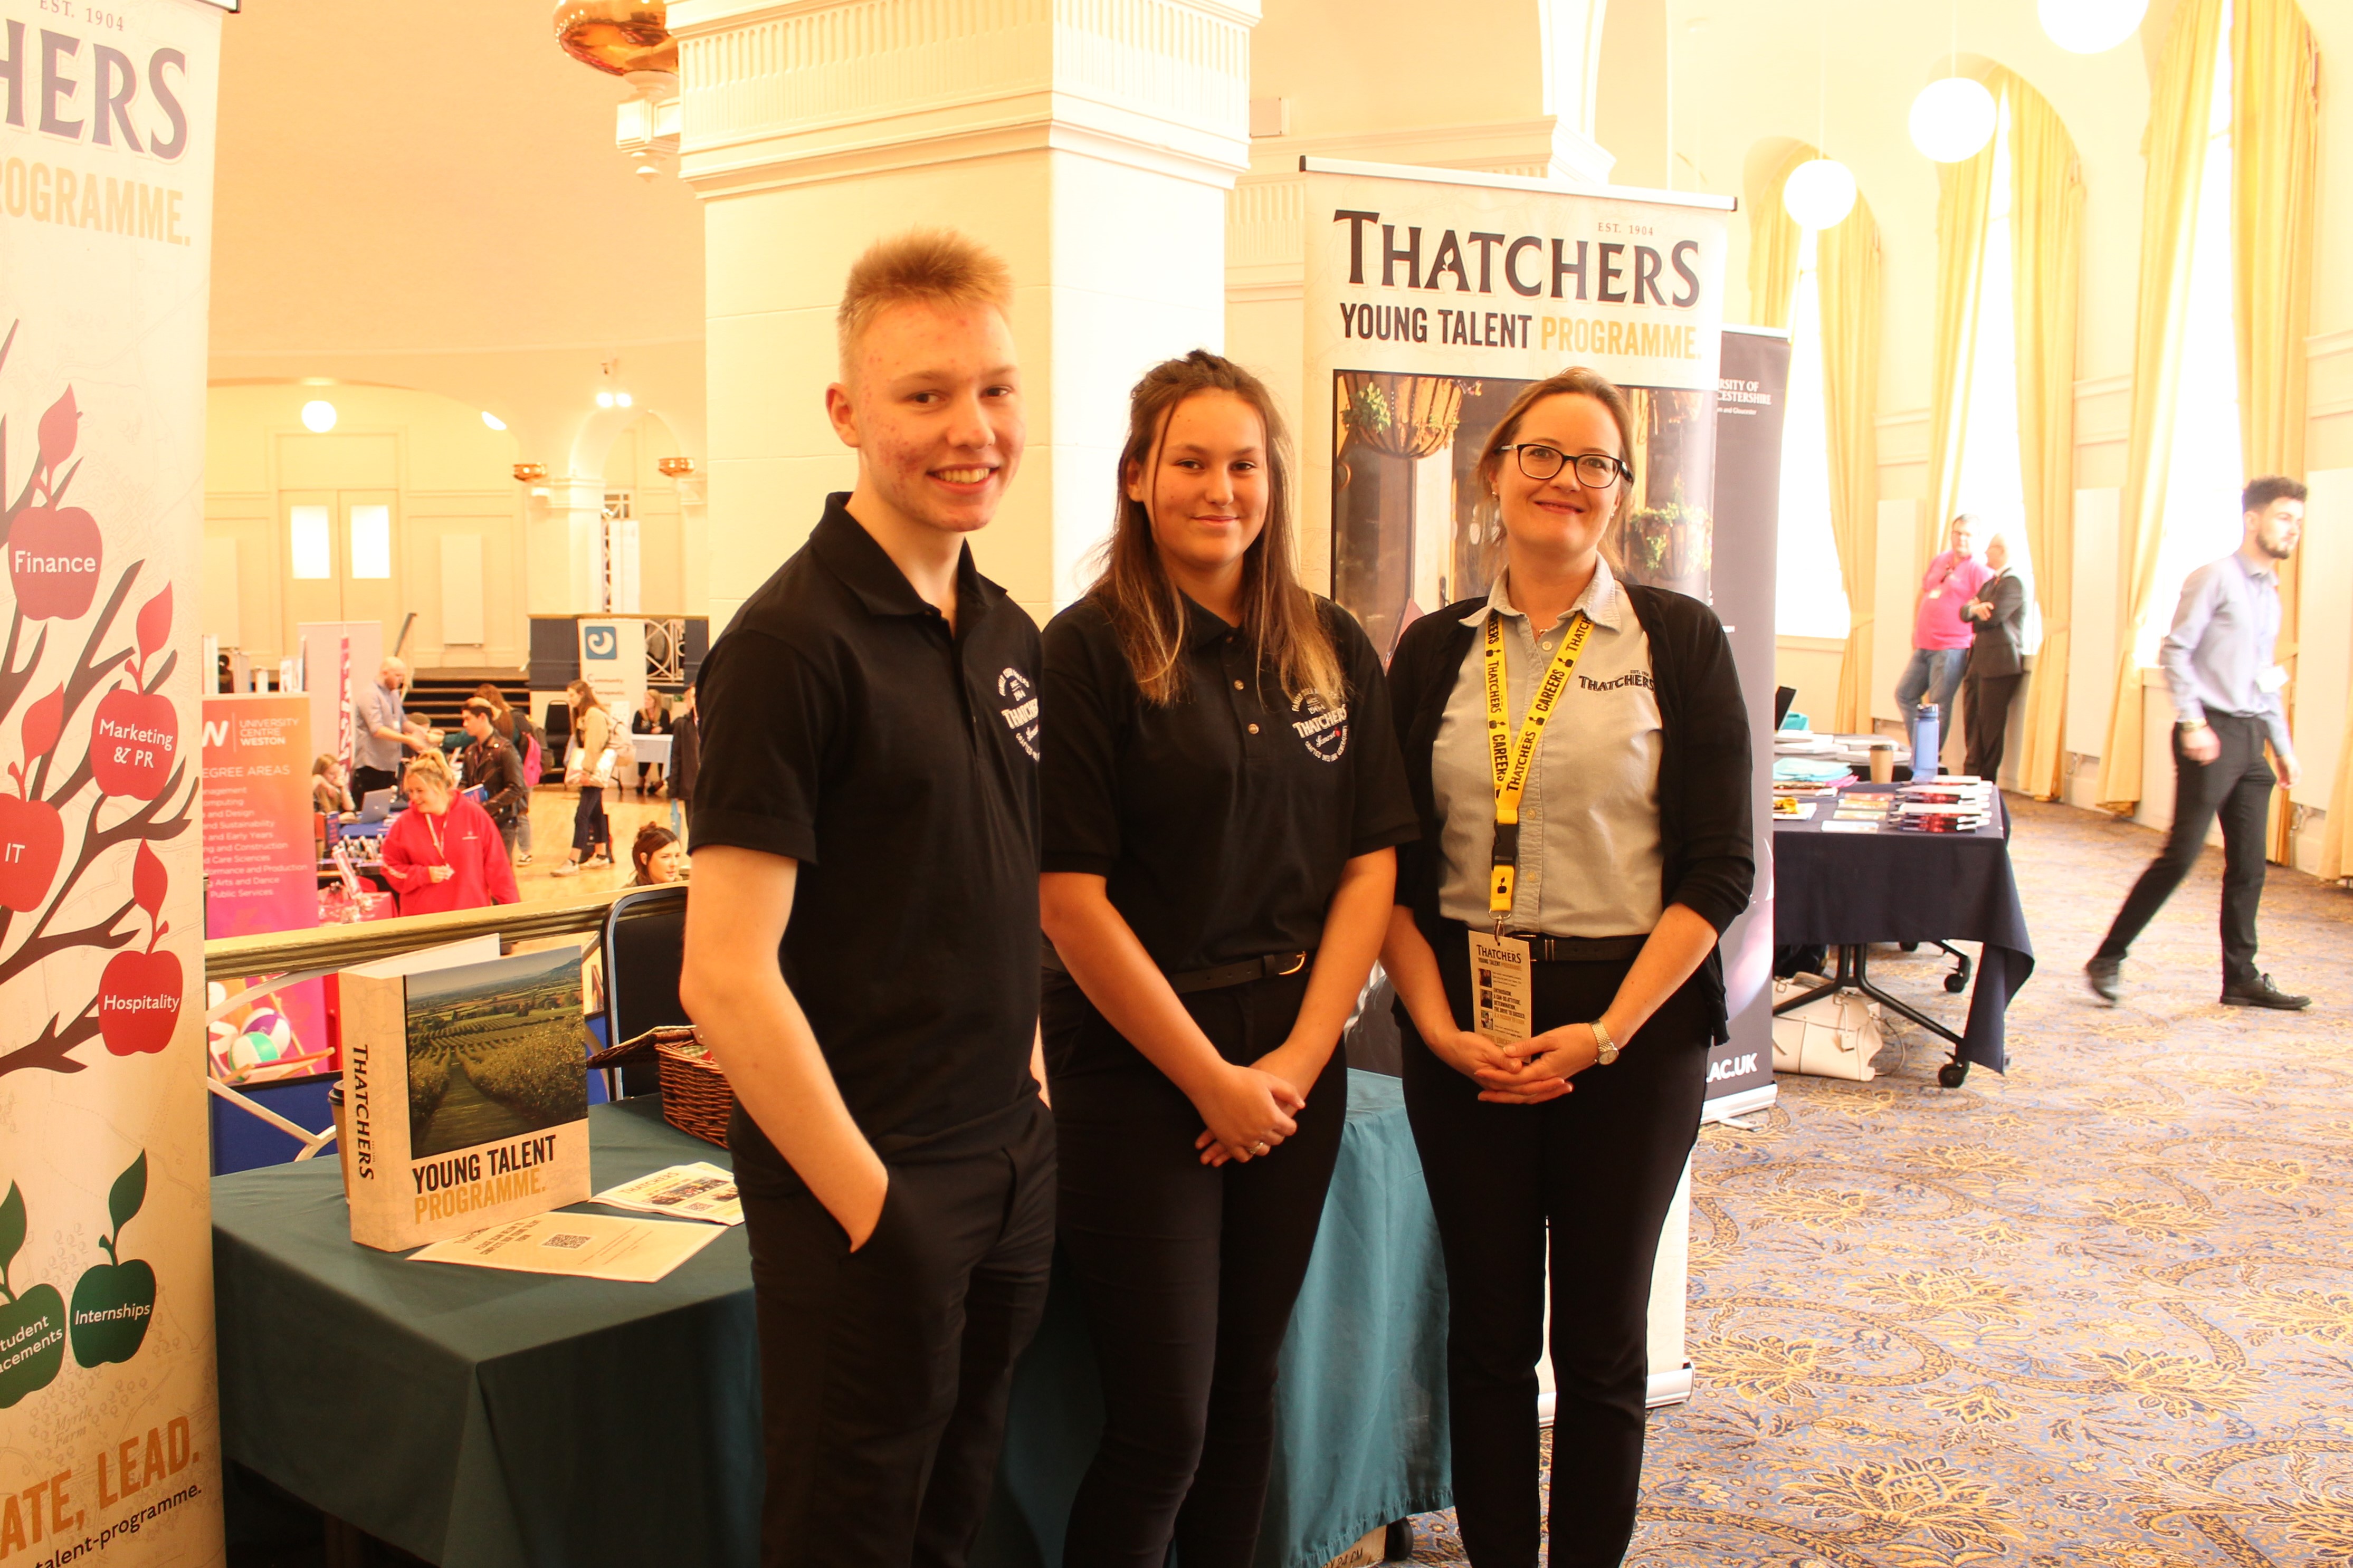 Thatchers Cider at the Brighter Futures Fair